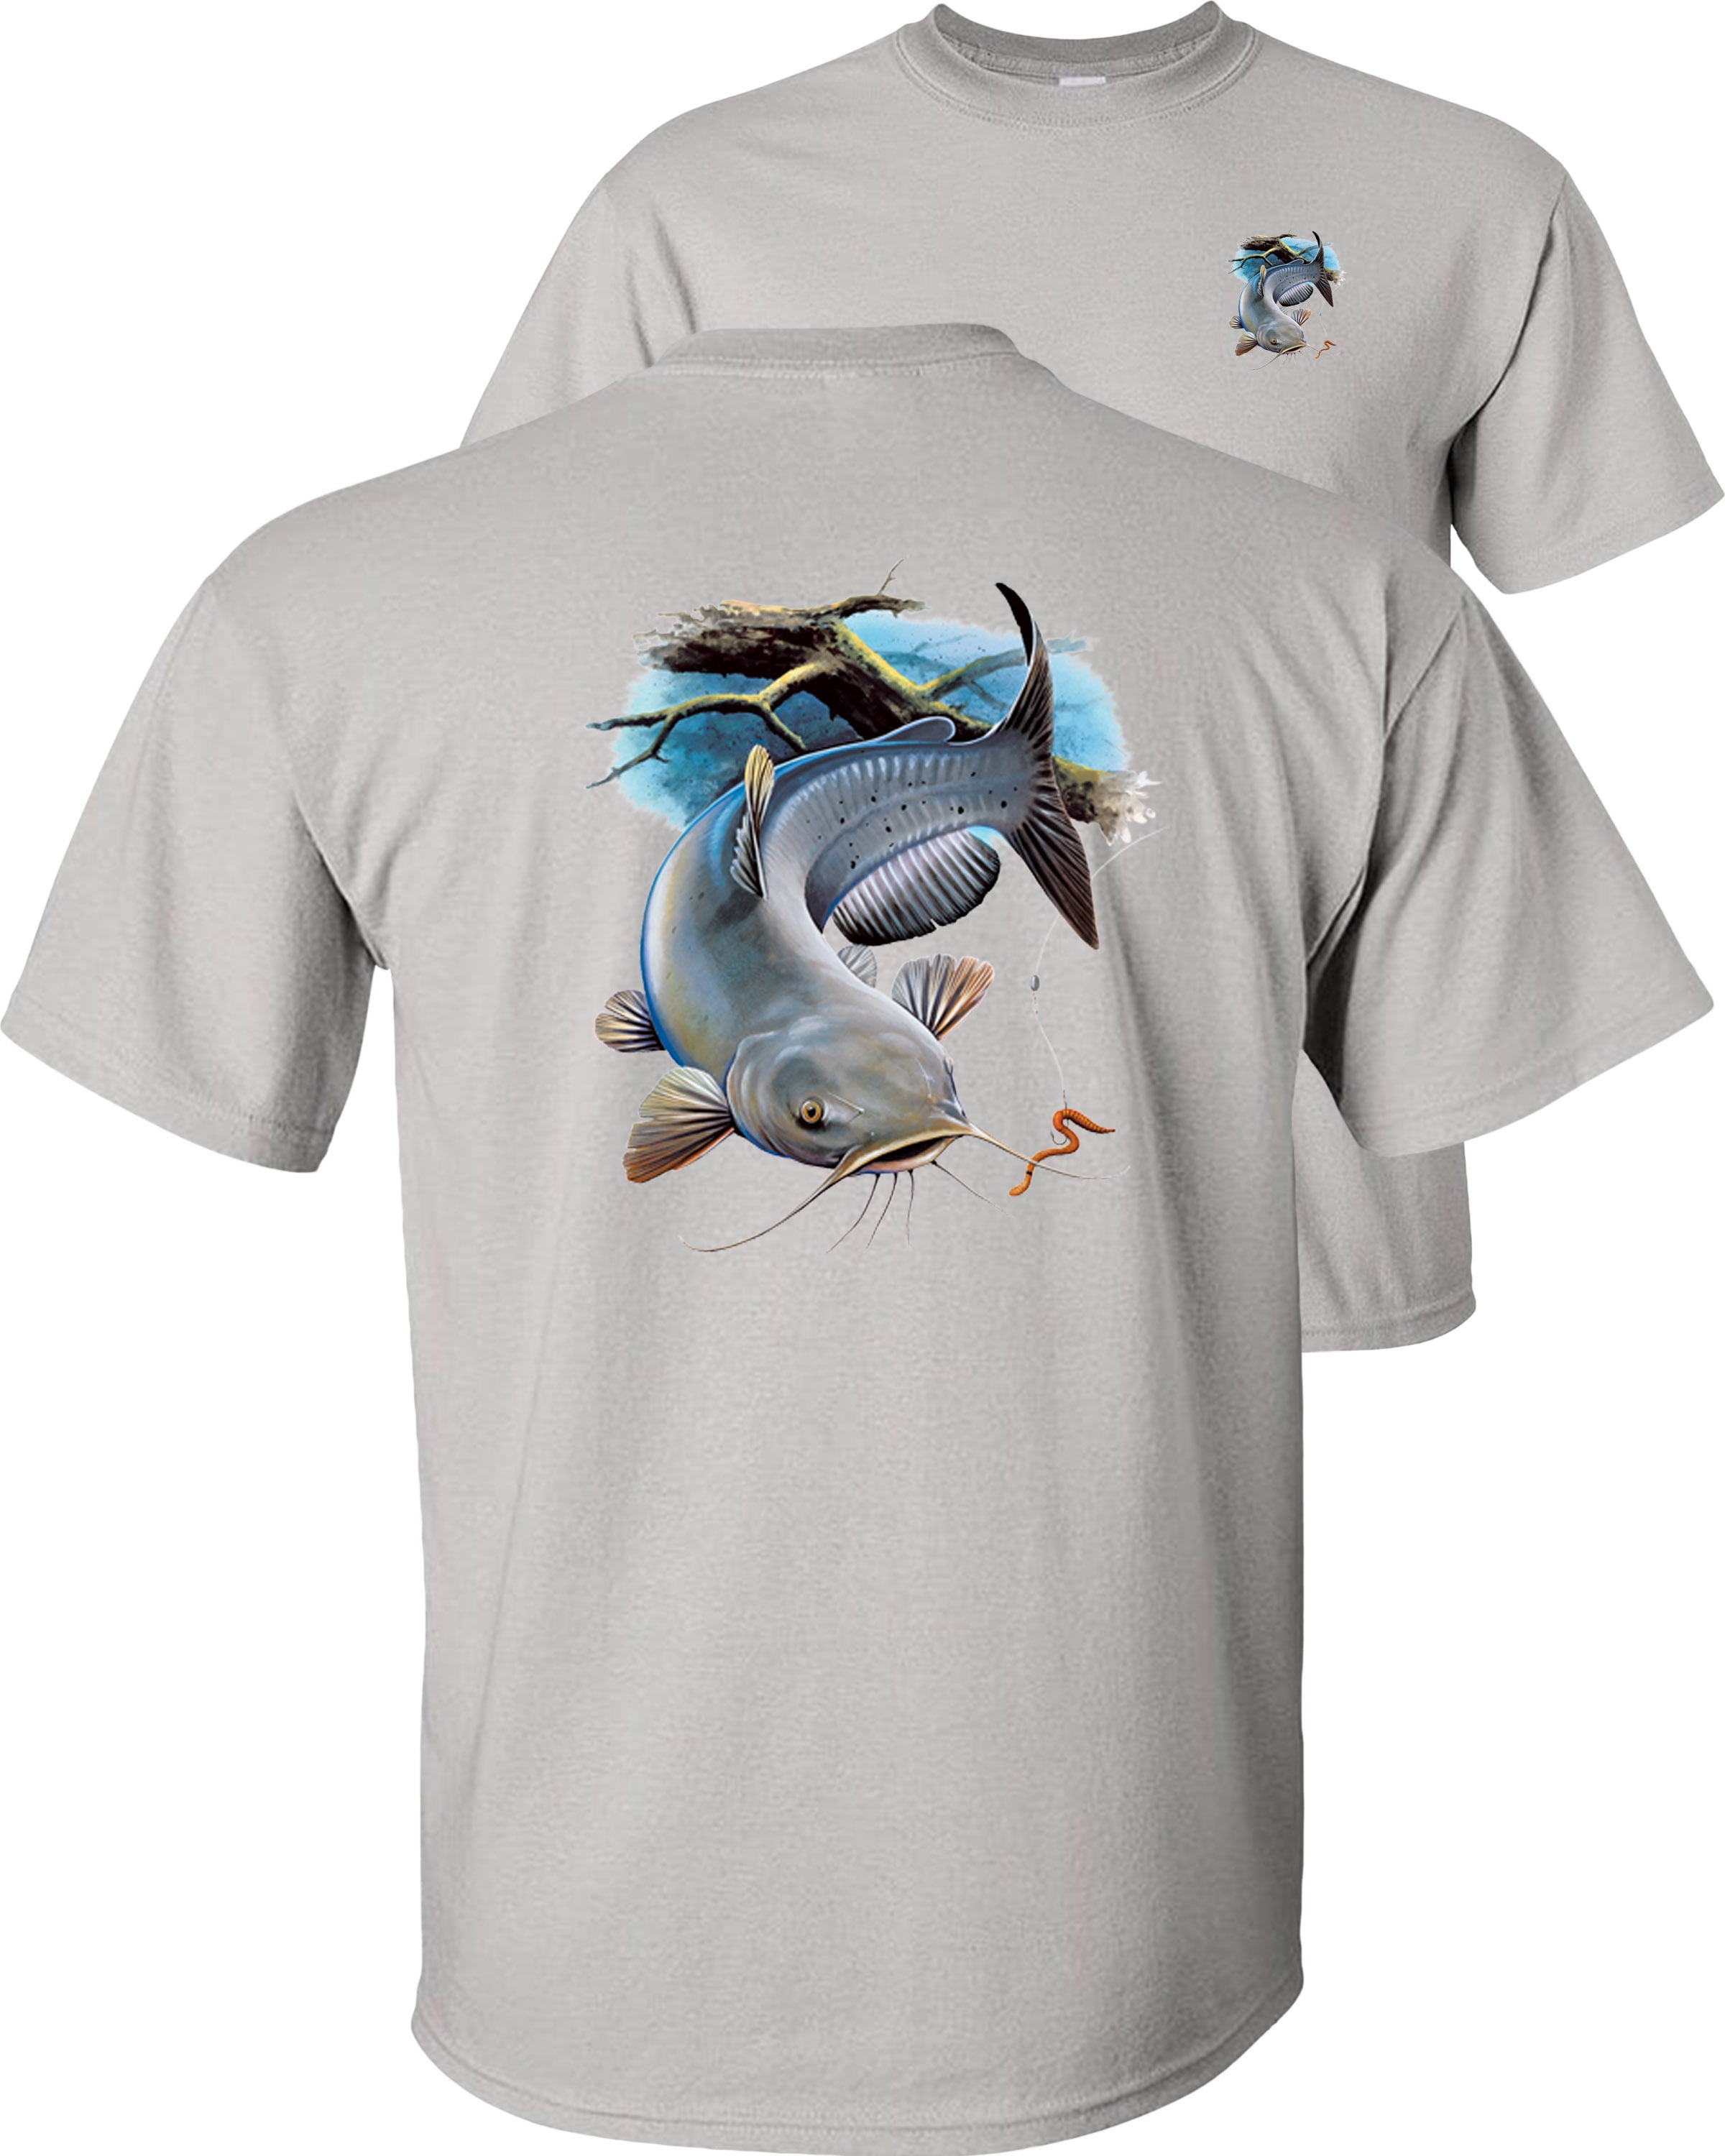 T-Shirt, Catfish Fair Graphic Fishing River Channel, Grey-M Tee-Ice Blue Game